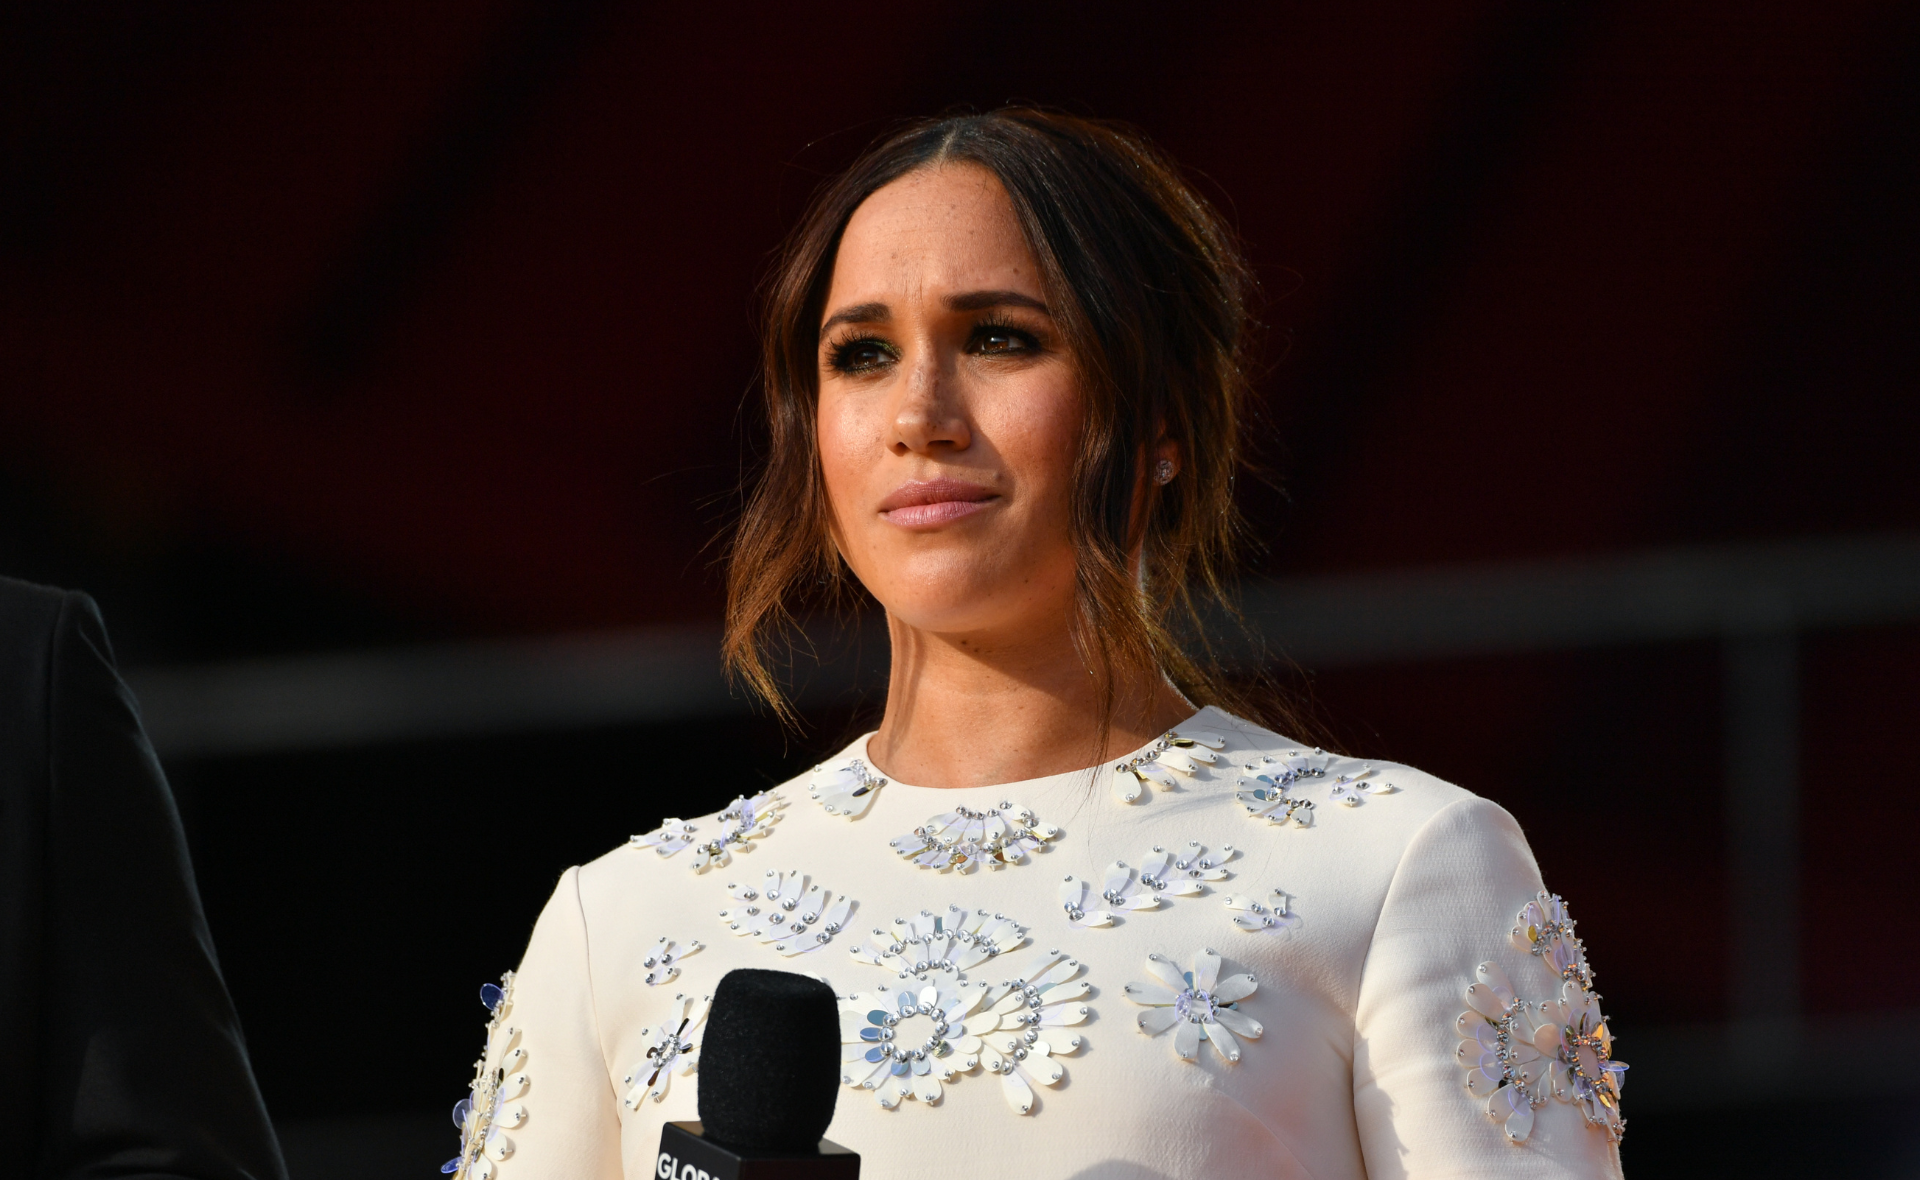 Meghan Markle received “disgusting” threats while living in the UK